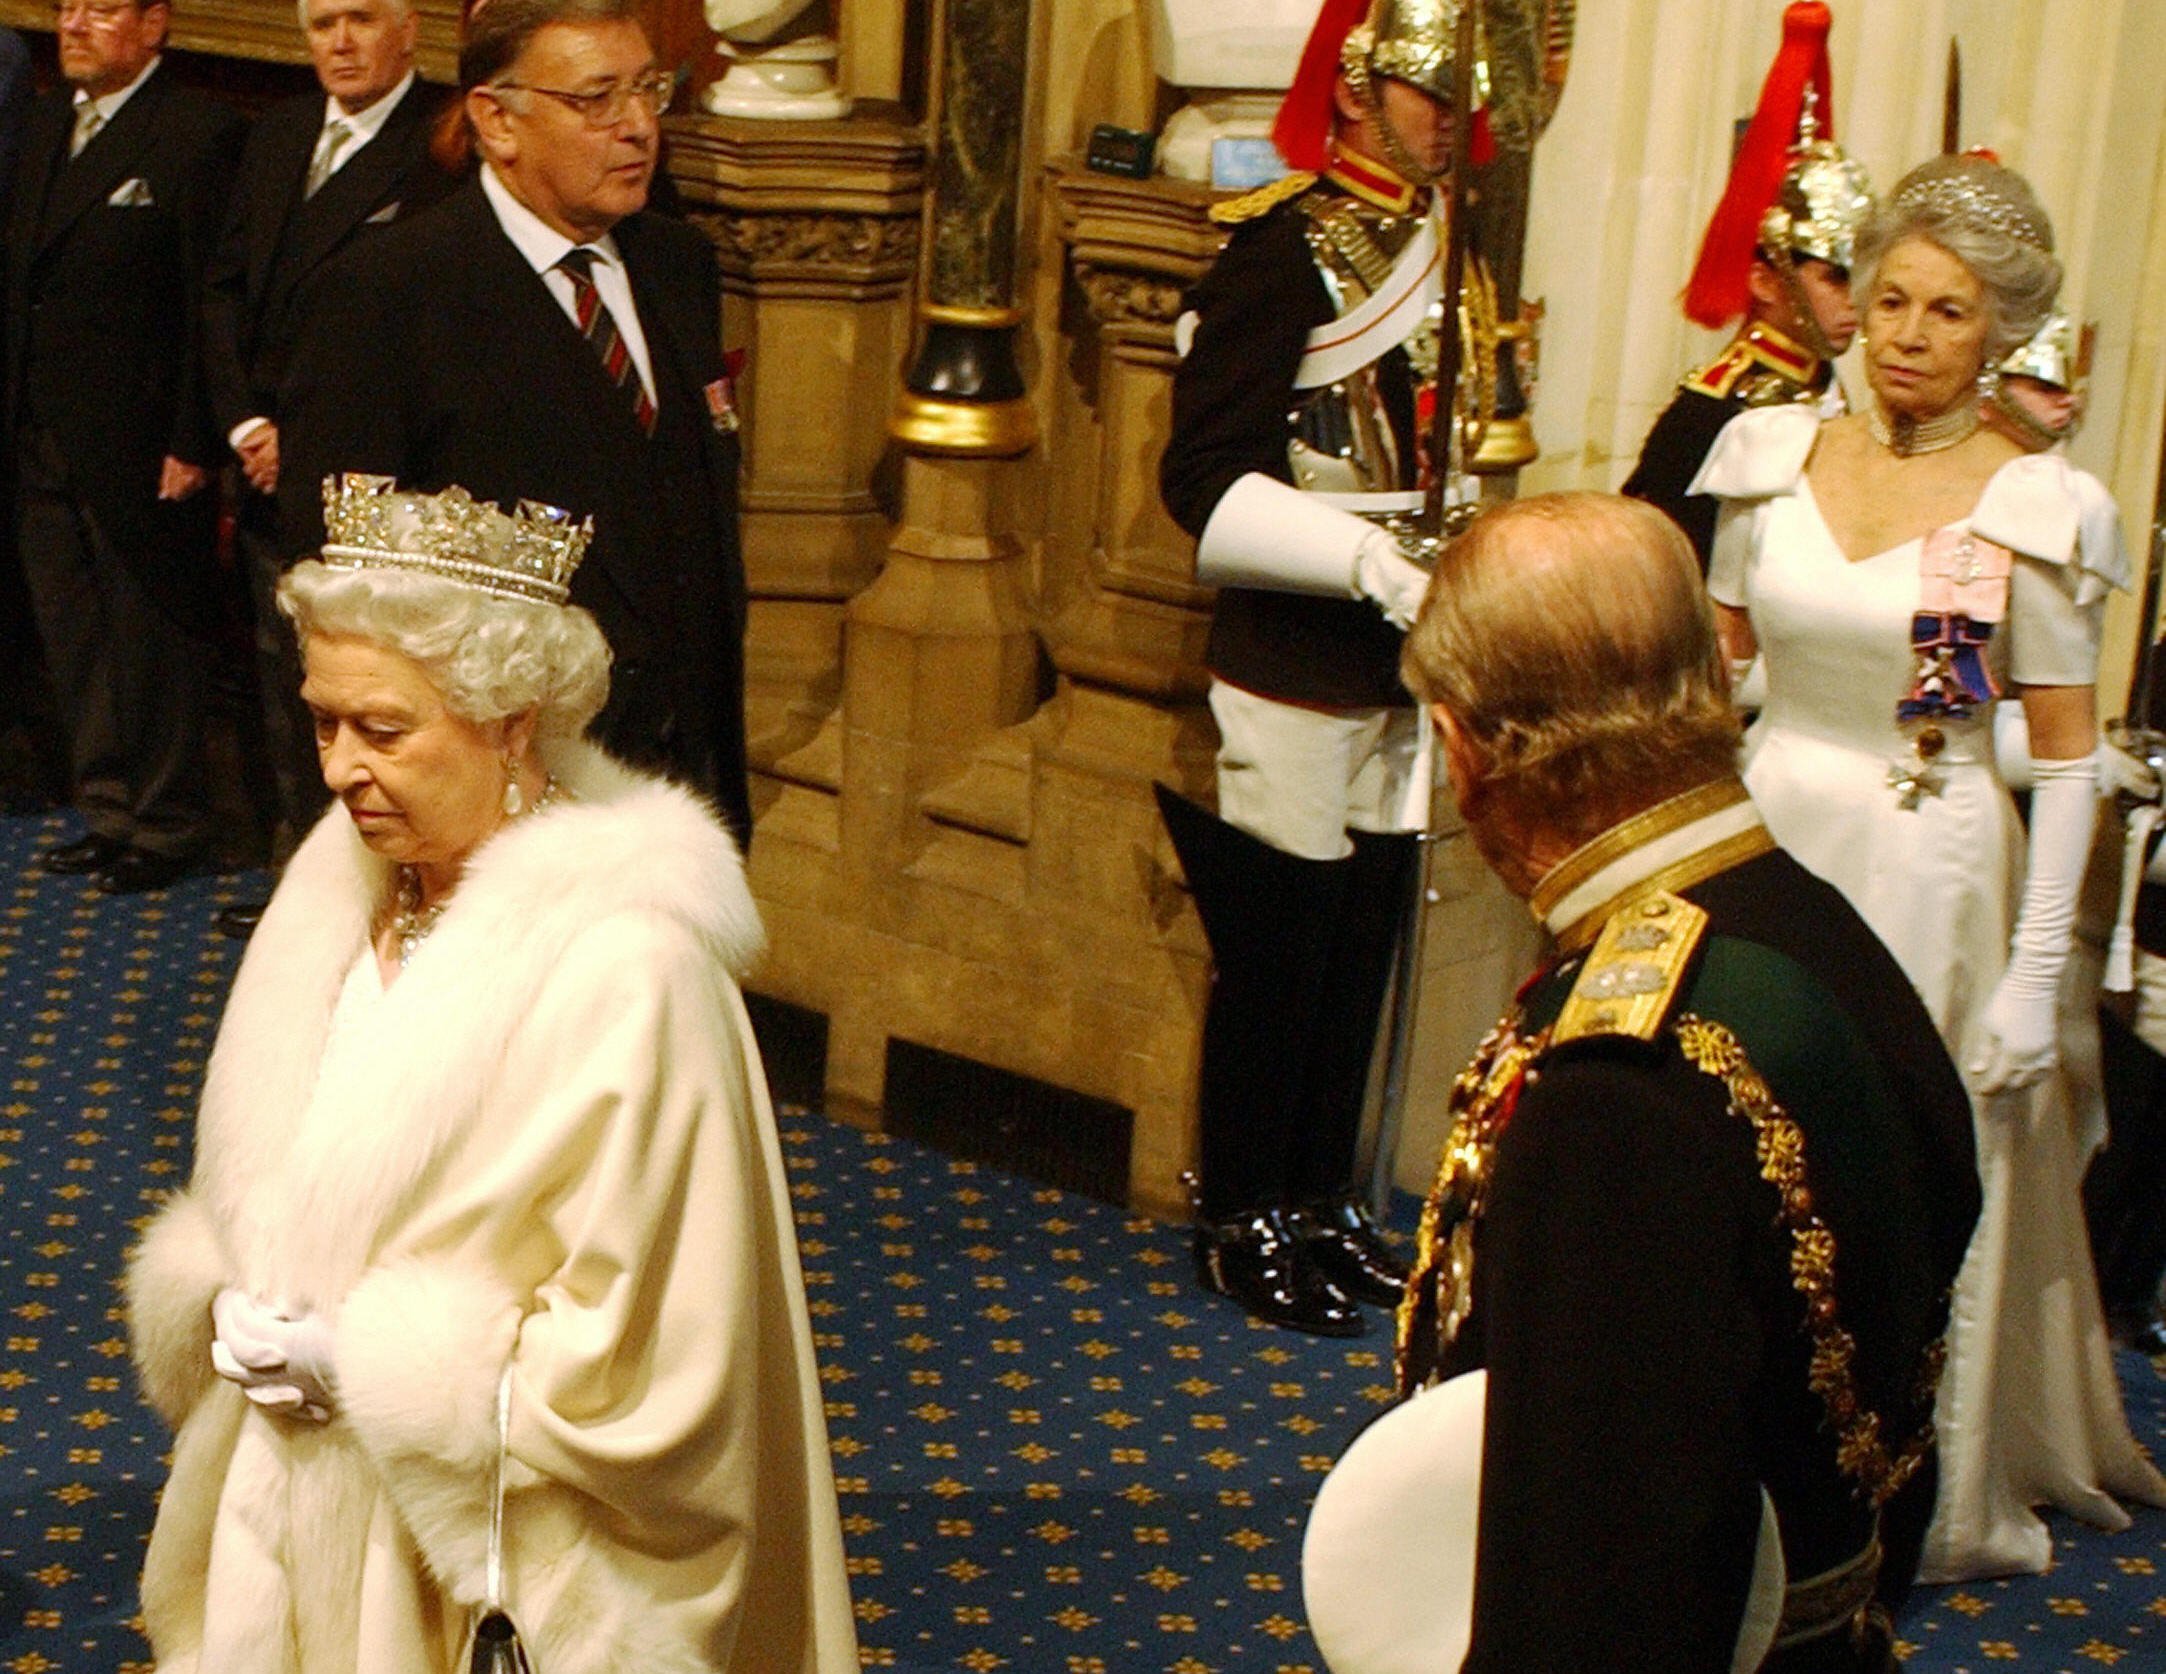 Queen Elizabeth II arrives on the Norman Porch as Prince Phillip looks back to a lady in waiting